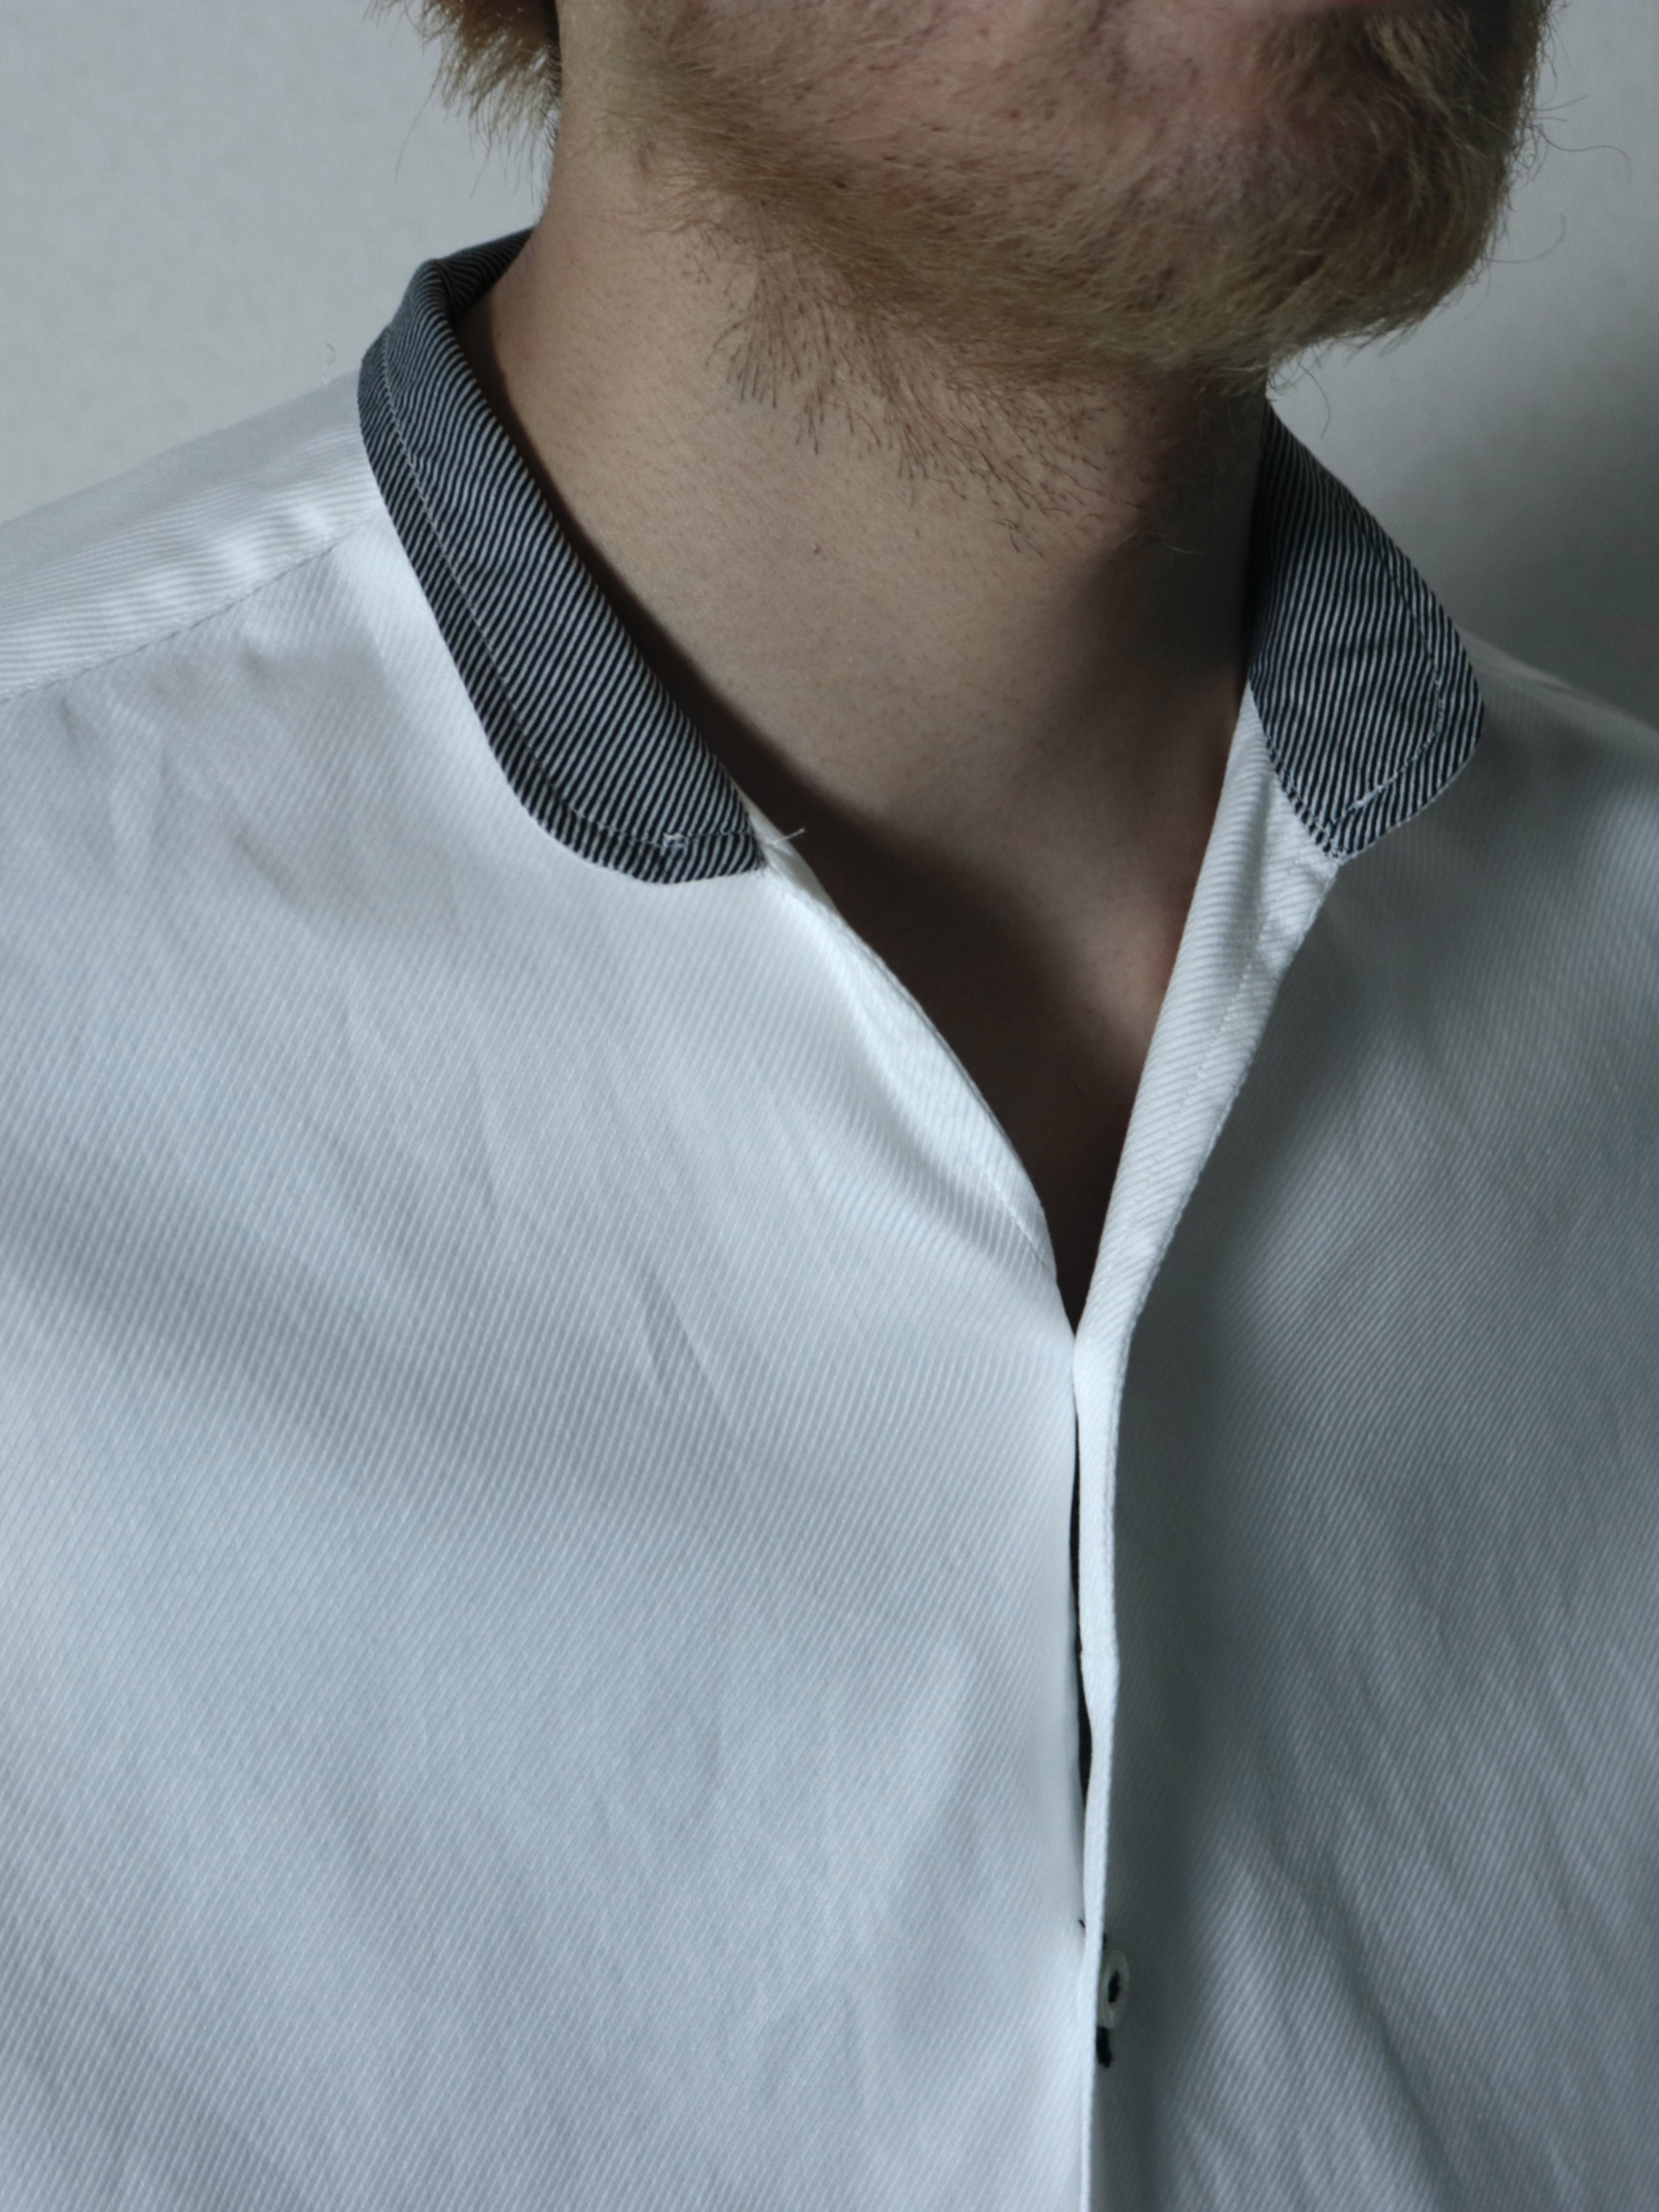 Equilibrio Stand collar Dress shirts / Made in Italy